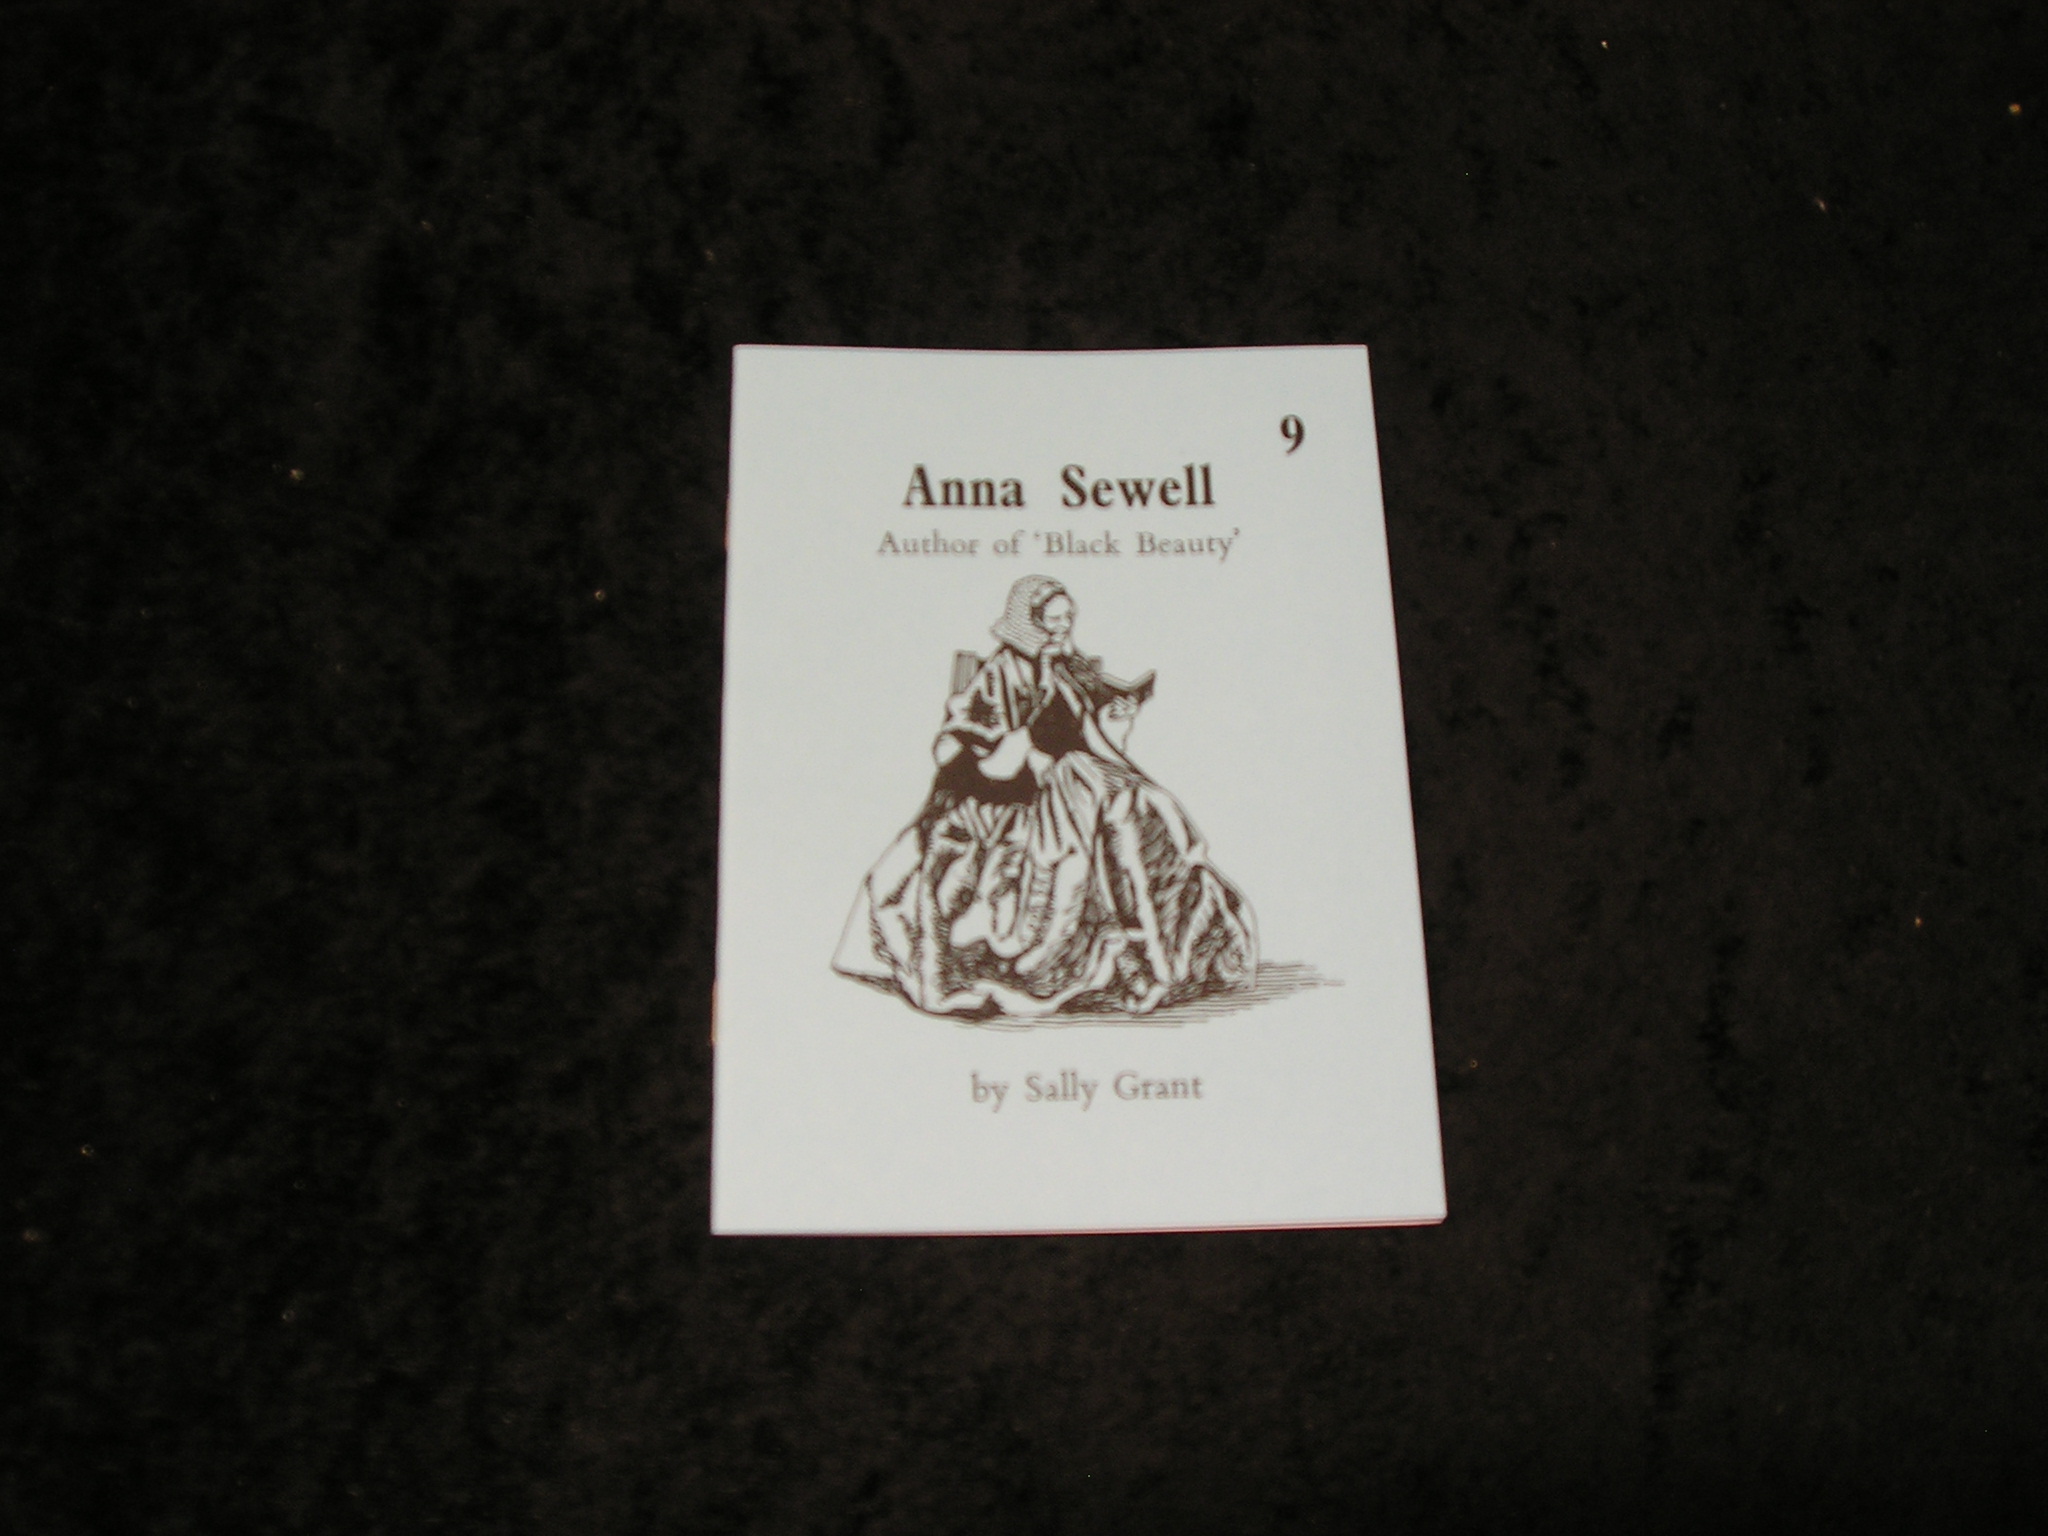 Anna Sewell Author of Black Beauty